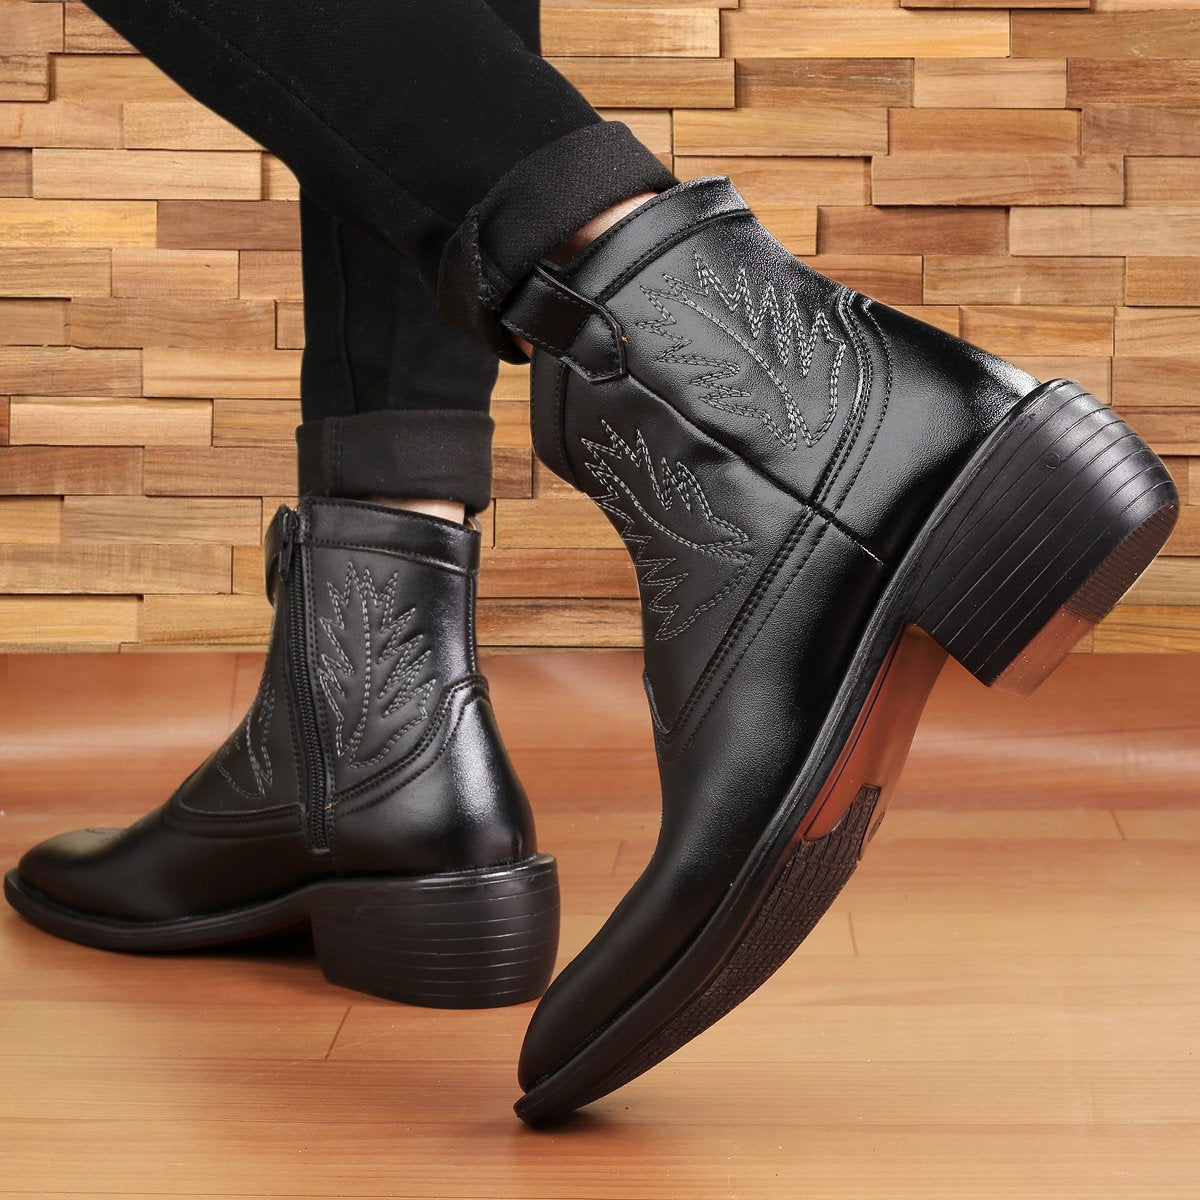 Buy New Men's Formal and Casual Retro Black Boots for all seasons